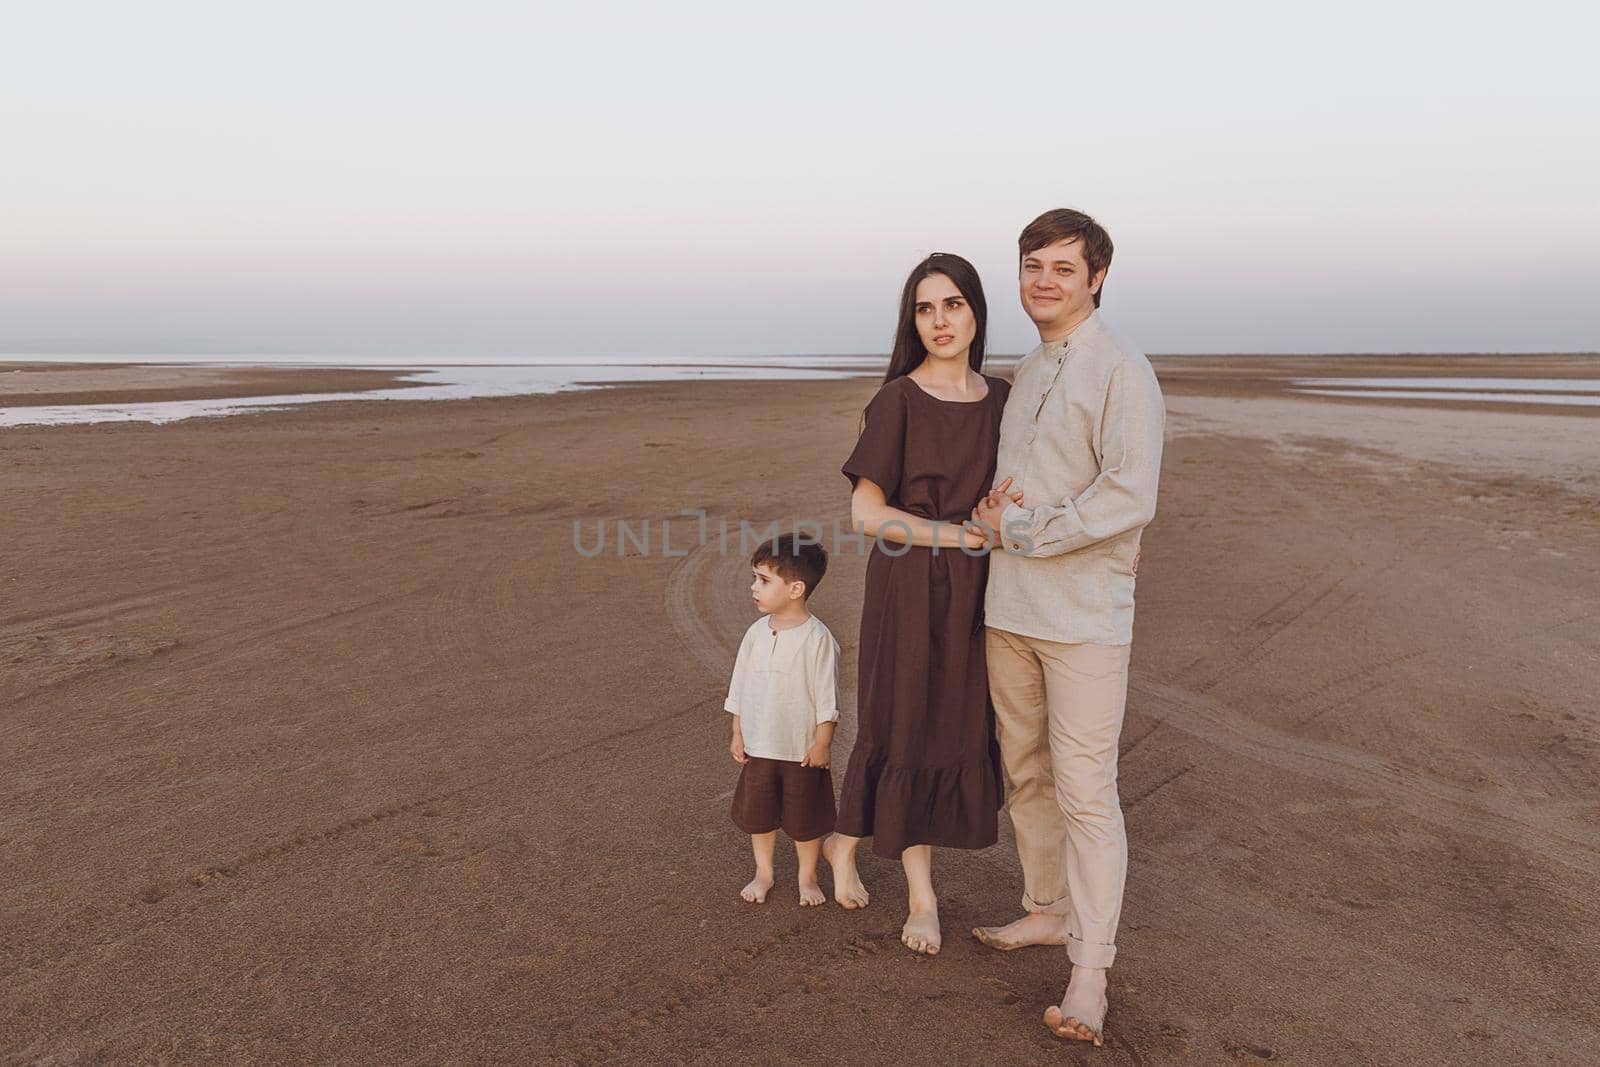 Family look of natural linen clothing on the evening beach. Copy space.